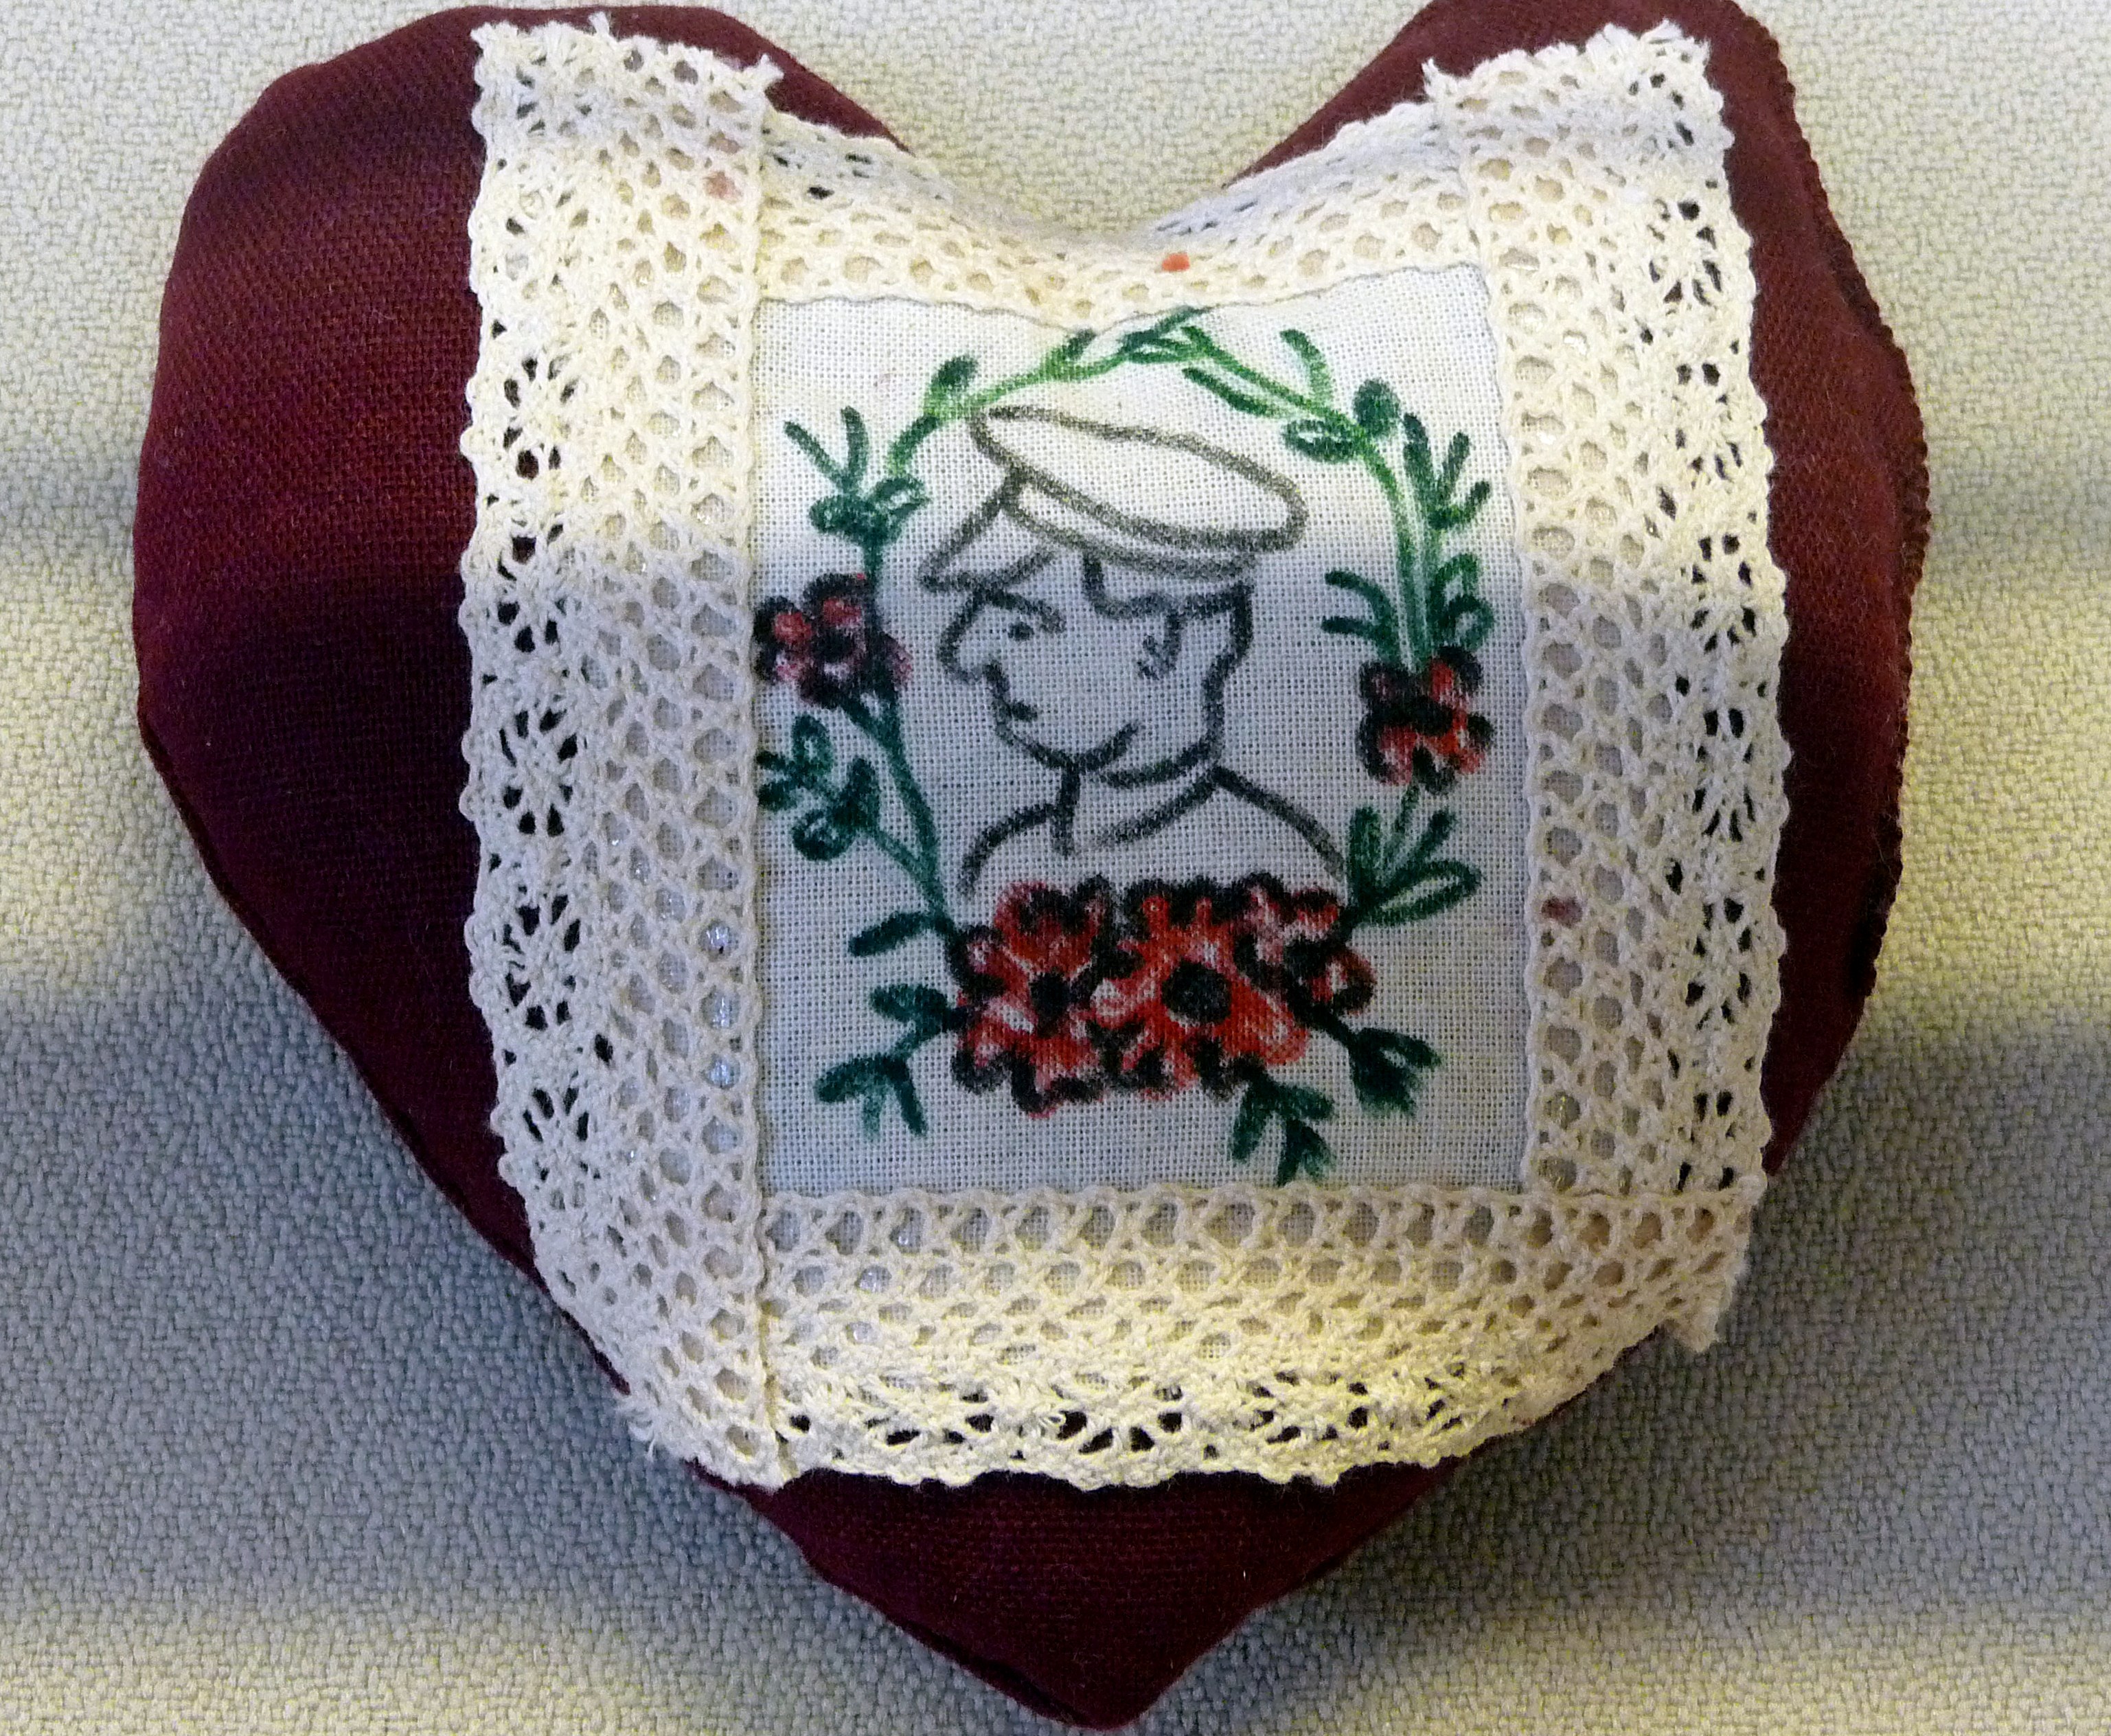 pincushion to commemorate World War 1 made by The Kilbane Family